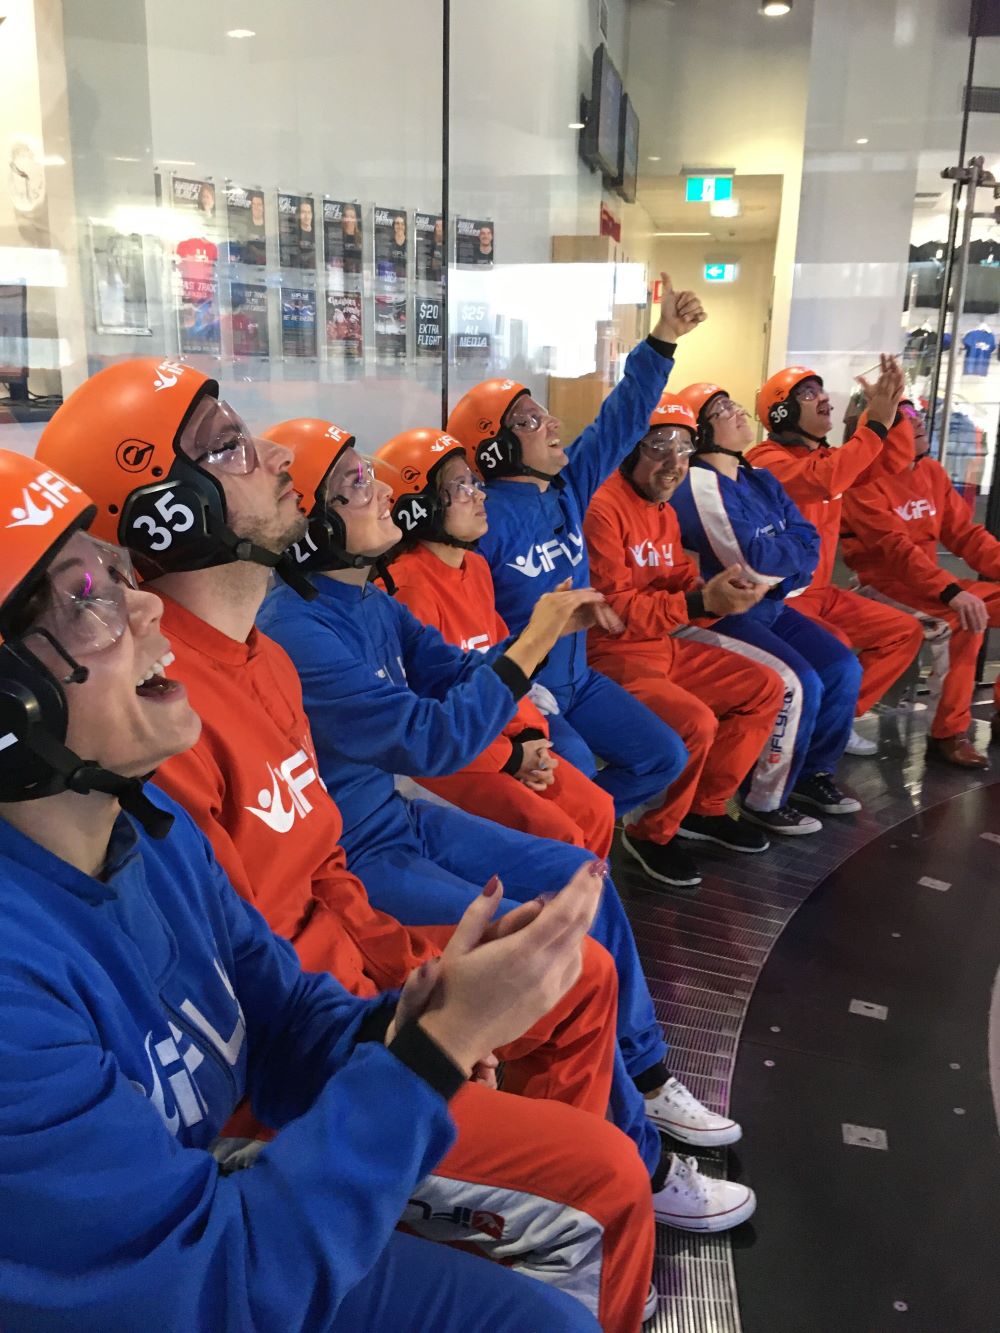 ifly penrith sydney west group celebrating at ifly indoor skydiving